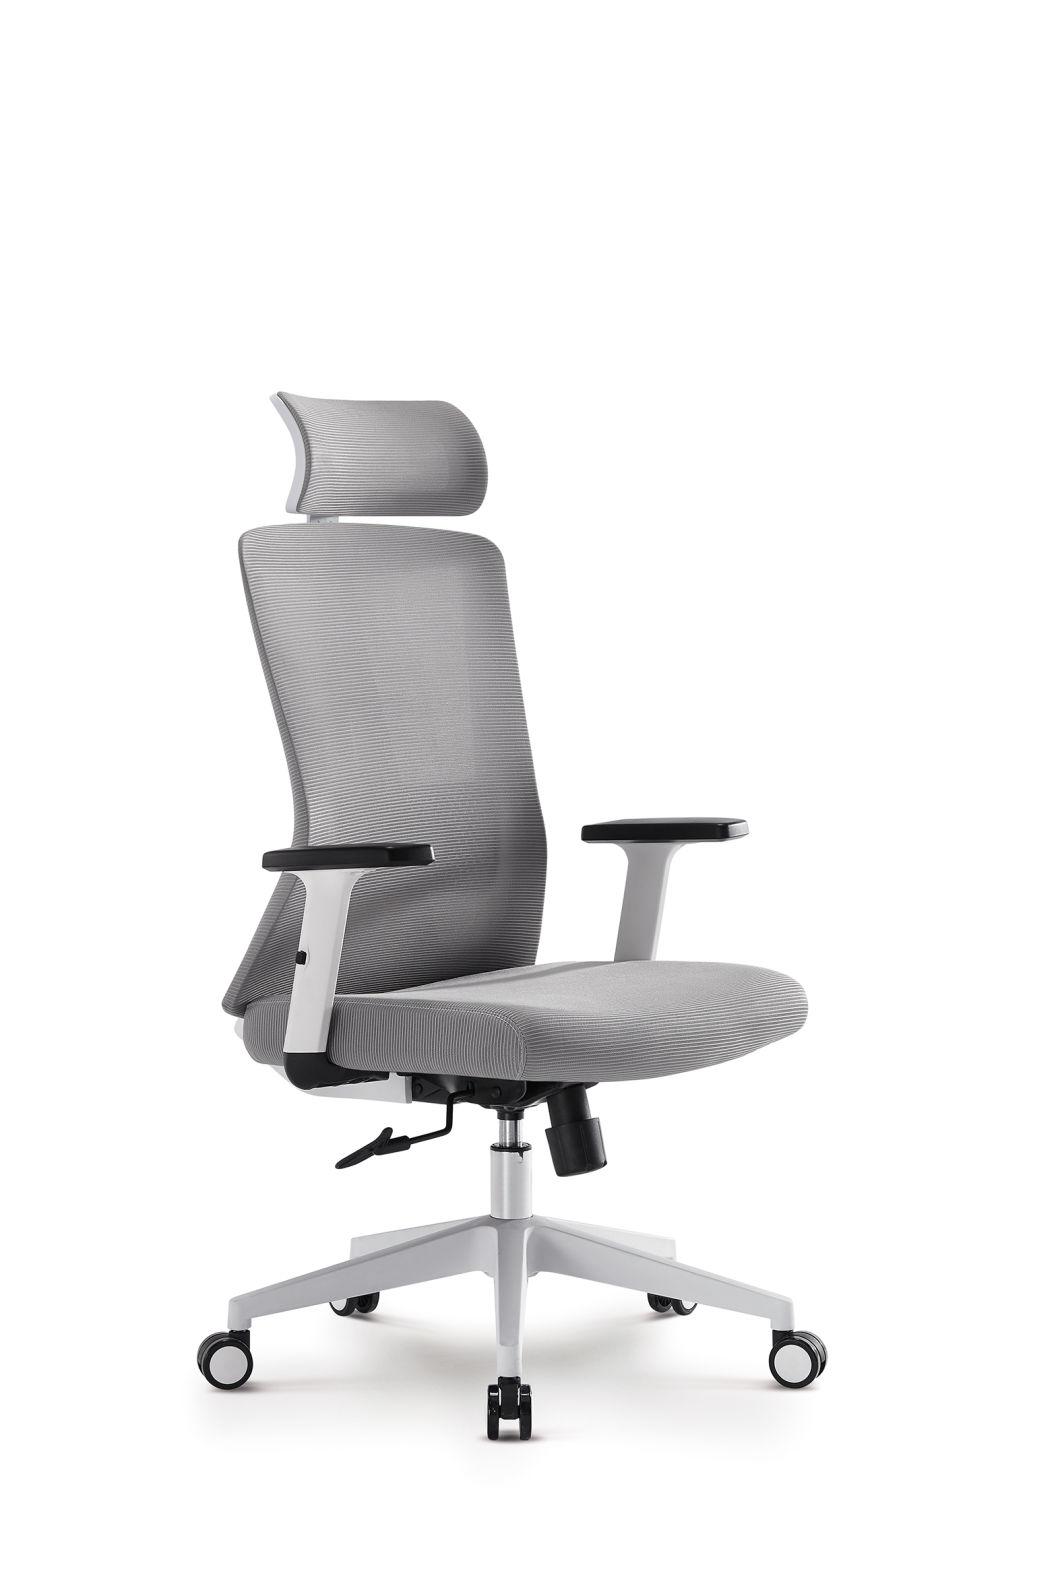 Swivel Executive Commercial Furniture Management High Back Adjustable Silla De Oficina Executive Office Chair